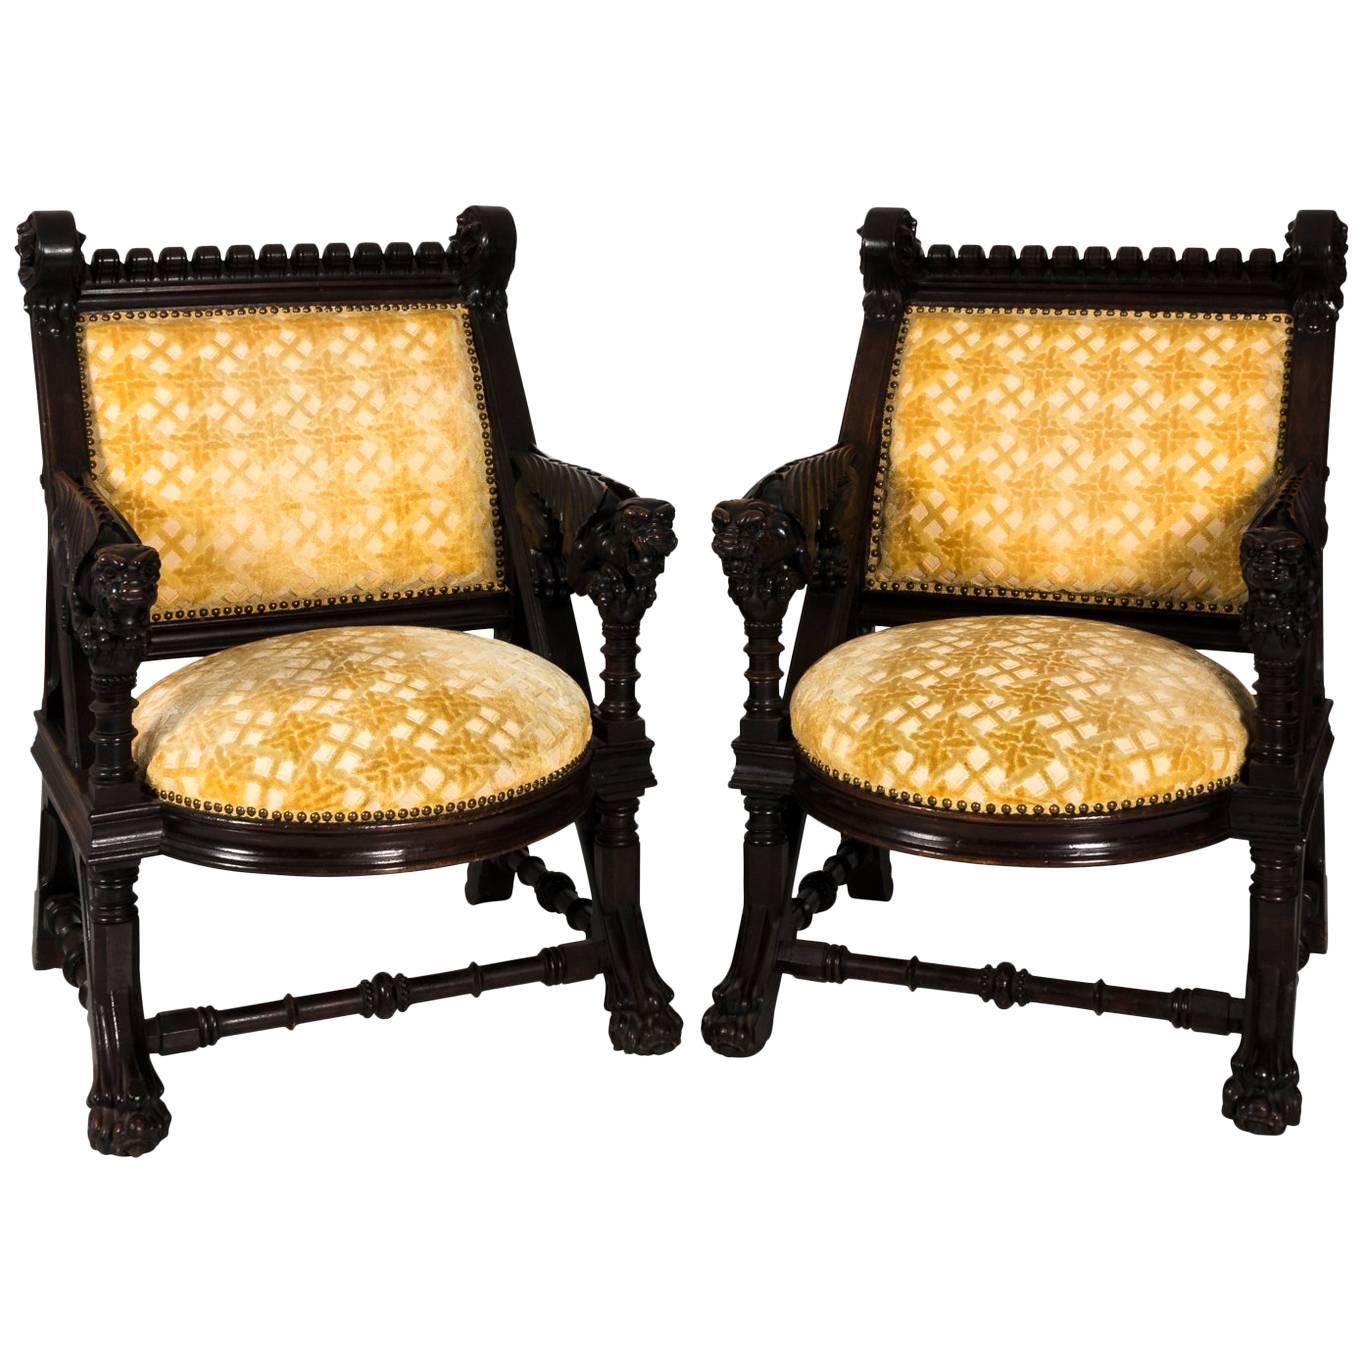 Pair of American Gothic Revival Armchairs by Daniel Pabst, circa 1878